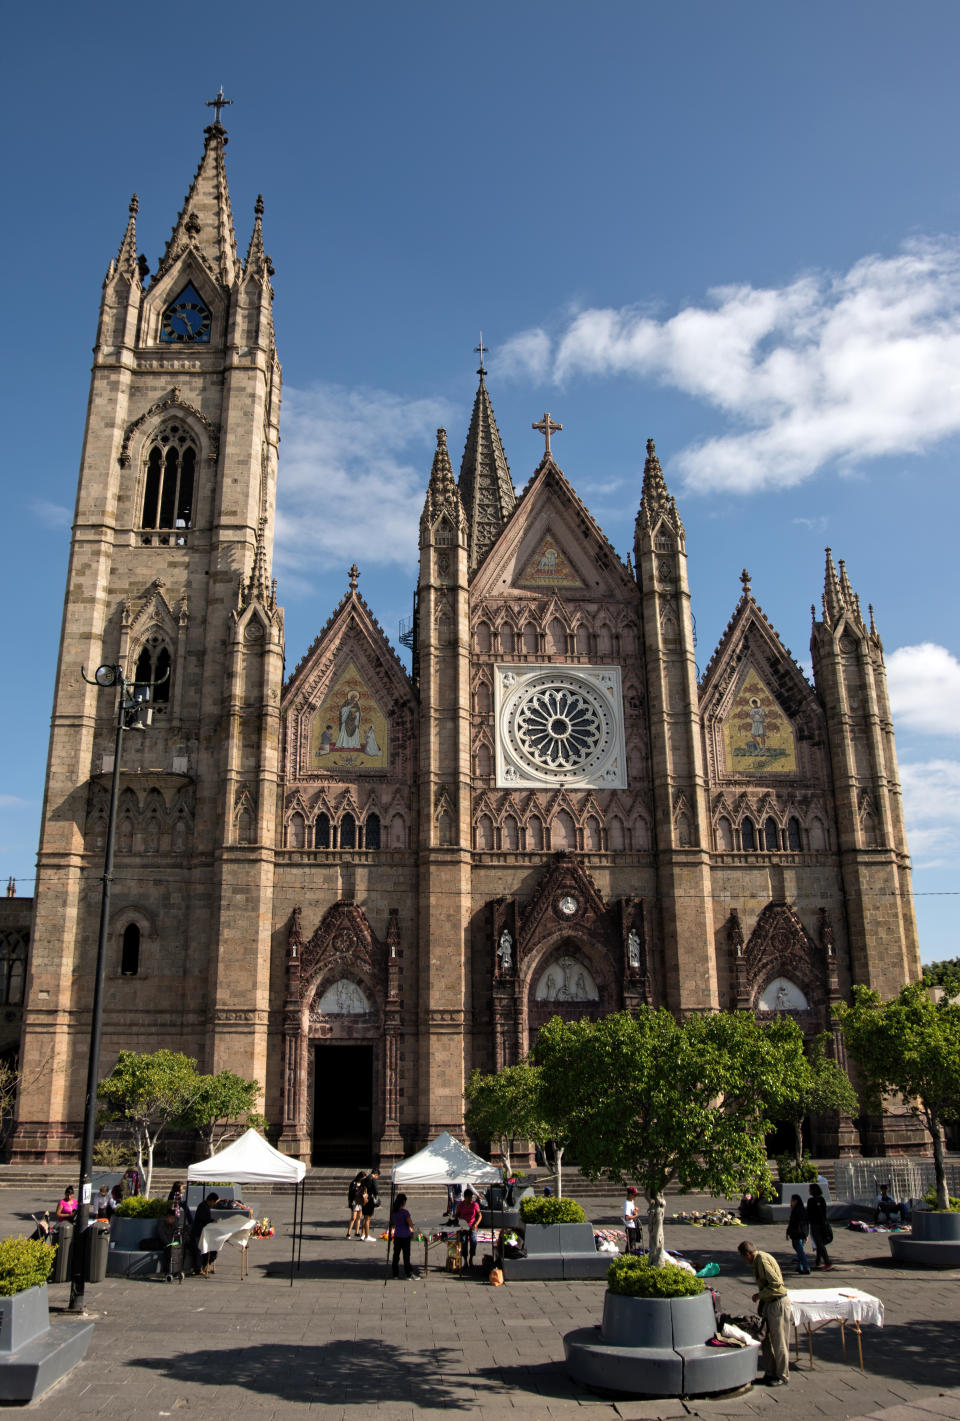 Guadalajara, Jalisco, Mexico - September 22, 2019: In the foreground, people can be seen at outdoor market stalls in Parque Expiatorio in front of the Church of the Atonement (Templo Expiatorio del Sant&#xed;simo Sacramento). The church was built in the neo-gothic architecture style over the course of 75 years (1897-1972).